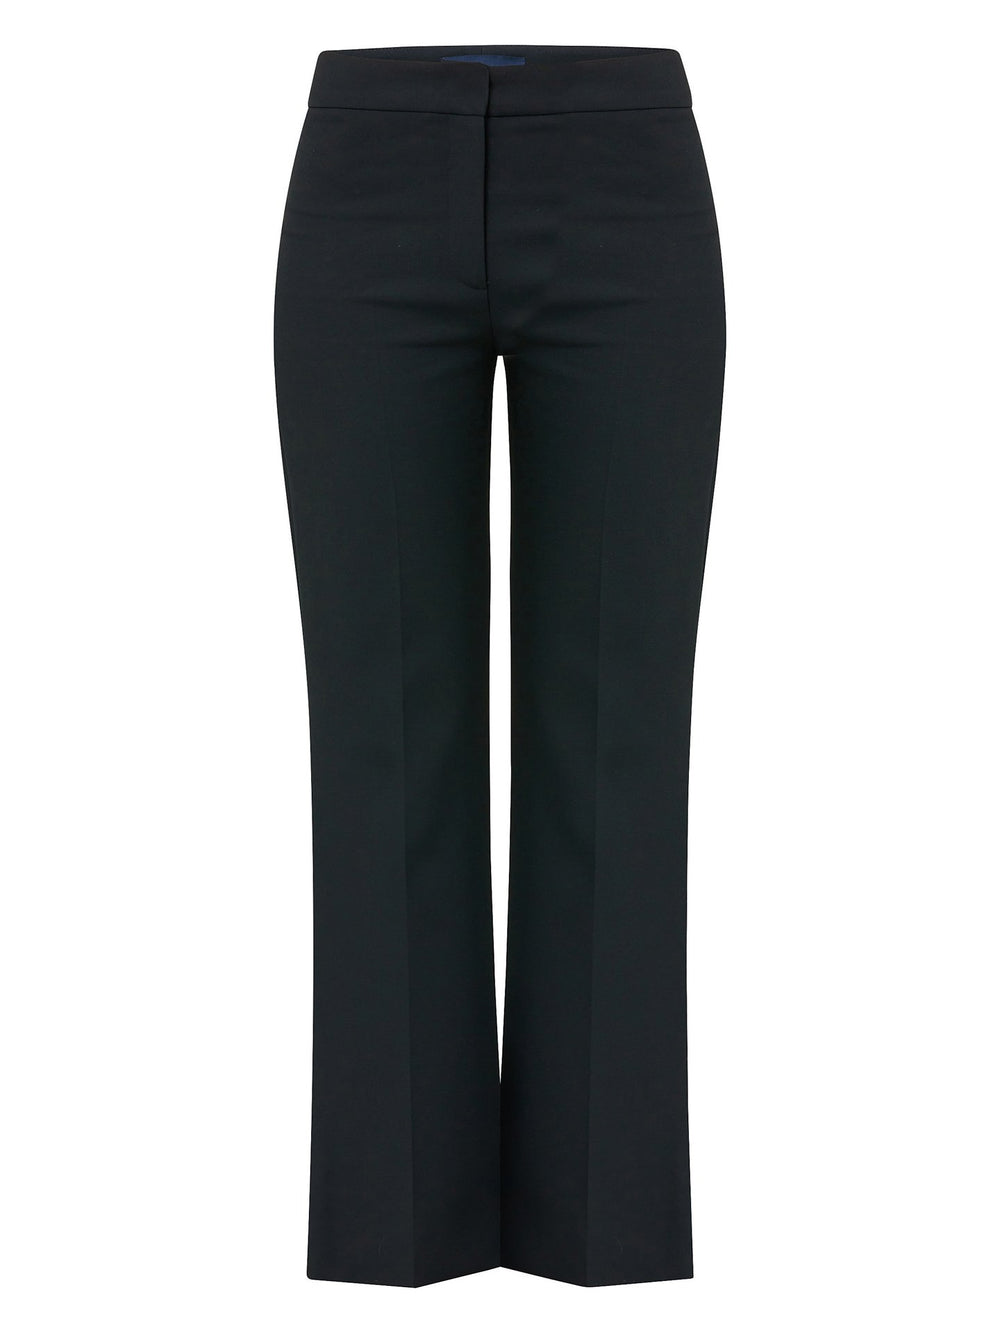 Kelly, an iconic black flared pant. crafted in sustainable double crepe with a hint of stretch. Revisit the 70's for this season’s game-changing look. Flares are sophisticated, comfortable & leg-lengthening. Guaranteed to flatter the form & never far from fashion’s front line.